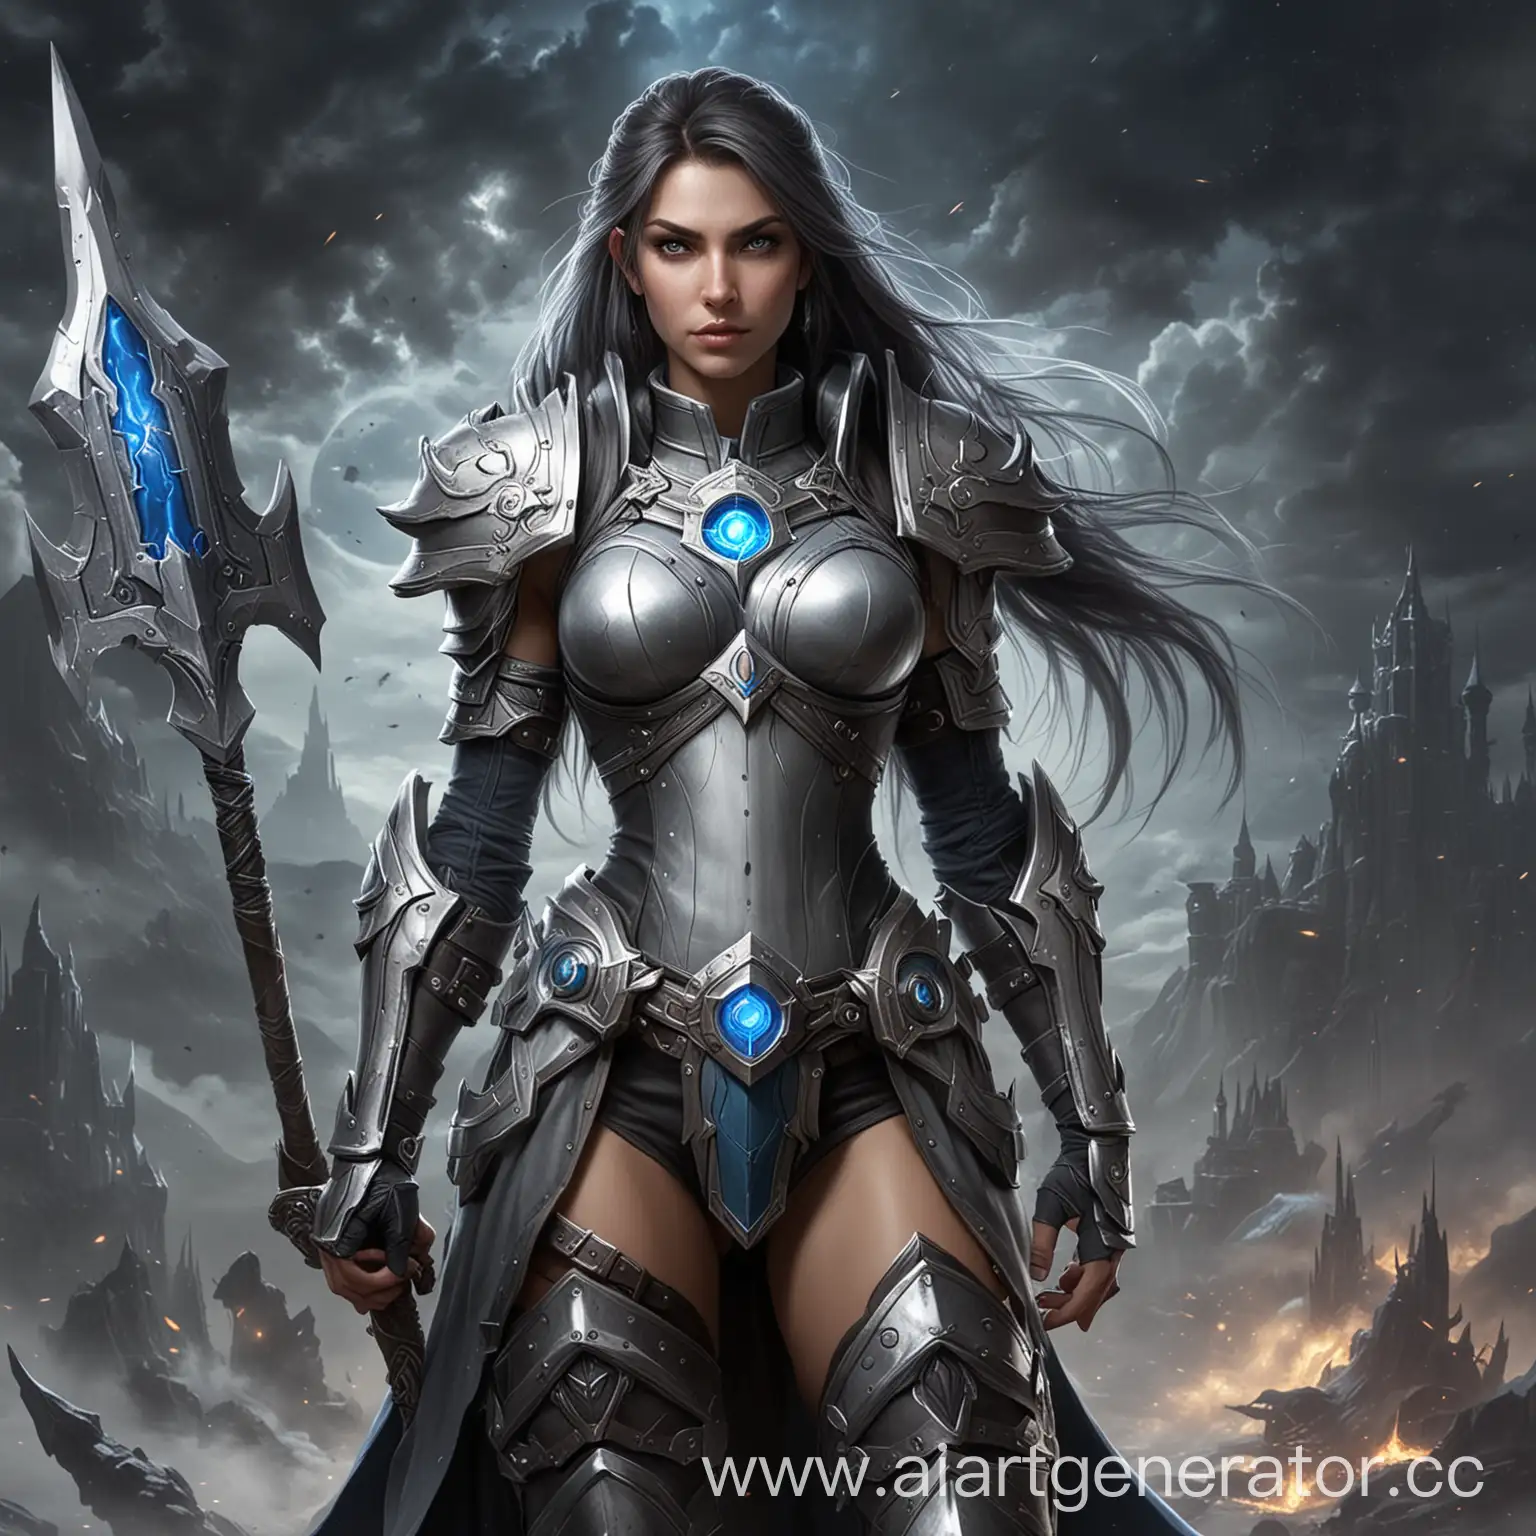 Heroes-of-the-Alliance-Grey-Guardian-in-the-World-of-Warcraft-Universe